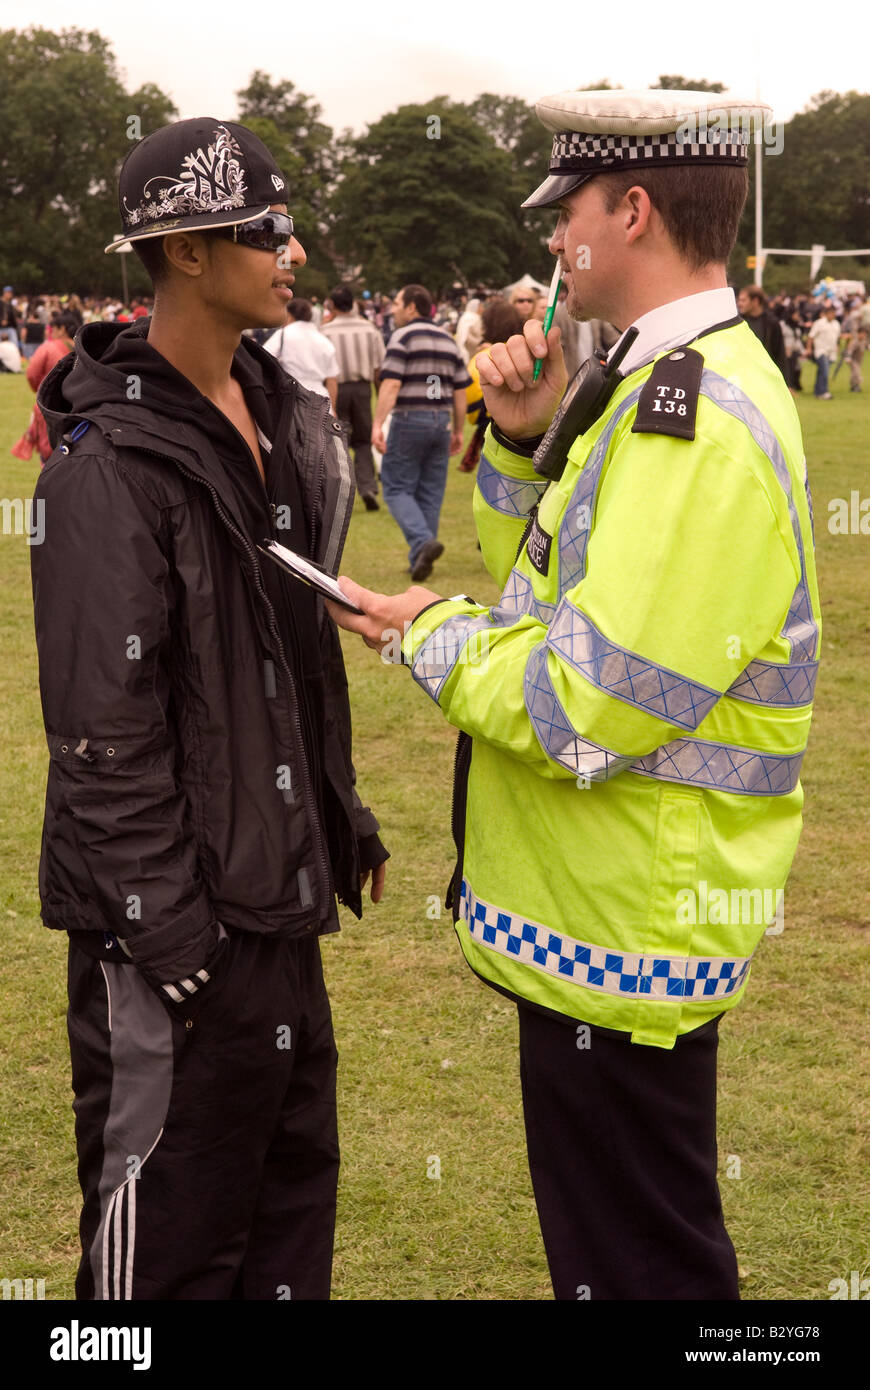 Metropolitan Police Officer questioning Asian youth at London Mela, 10th August 2008, Gunnersbury Park, London, W3. Stock Photo